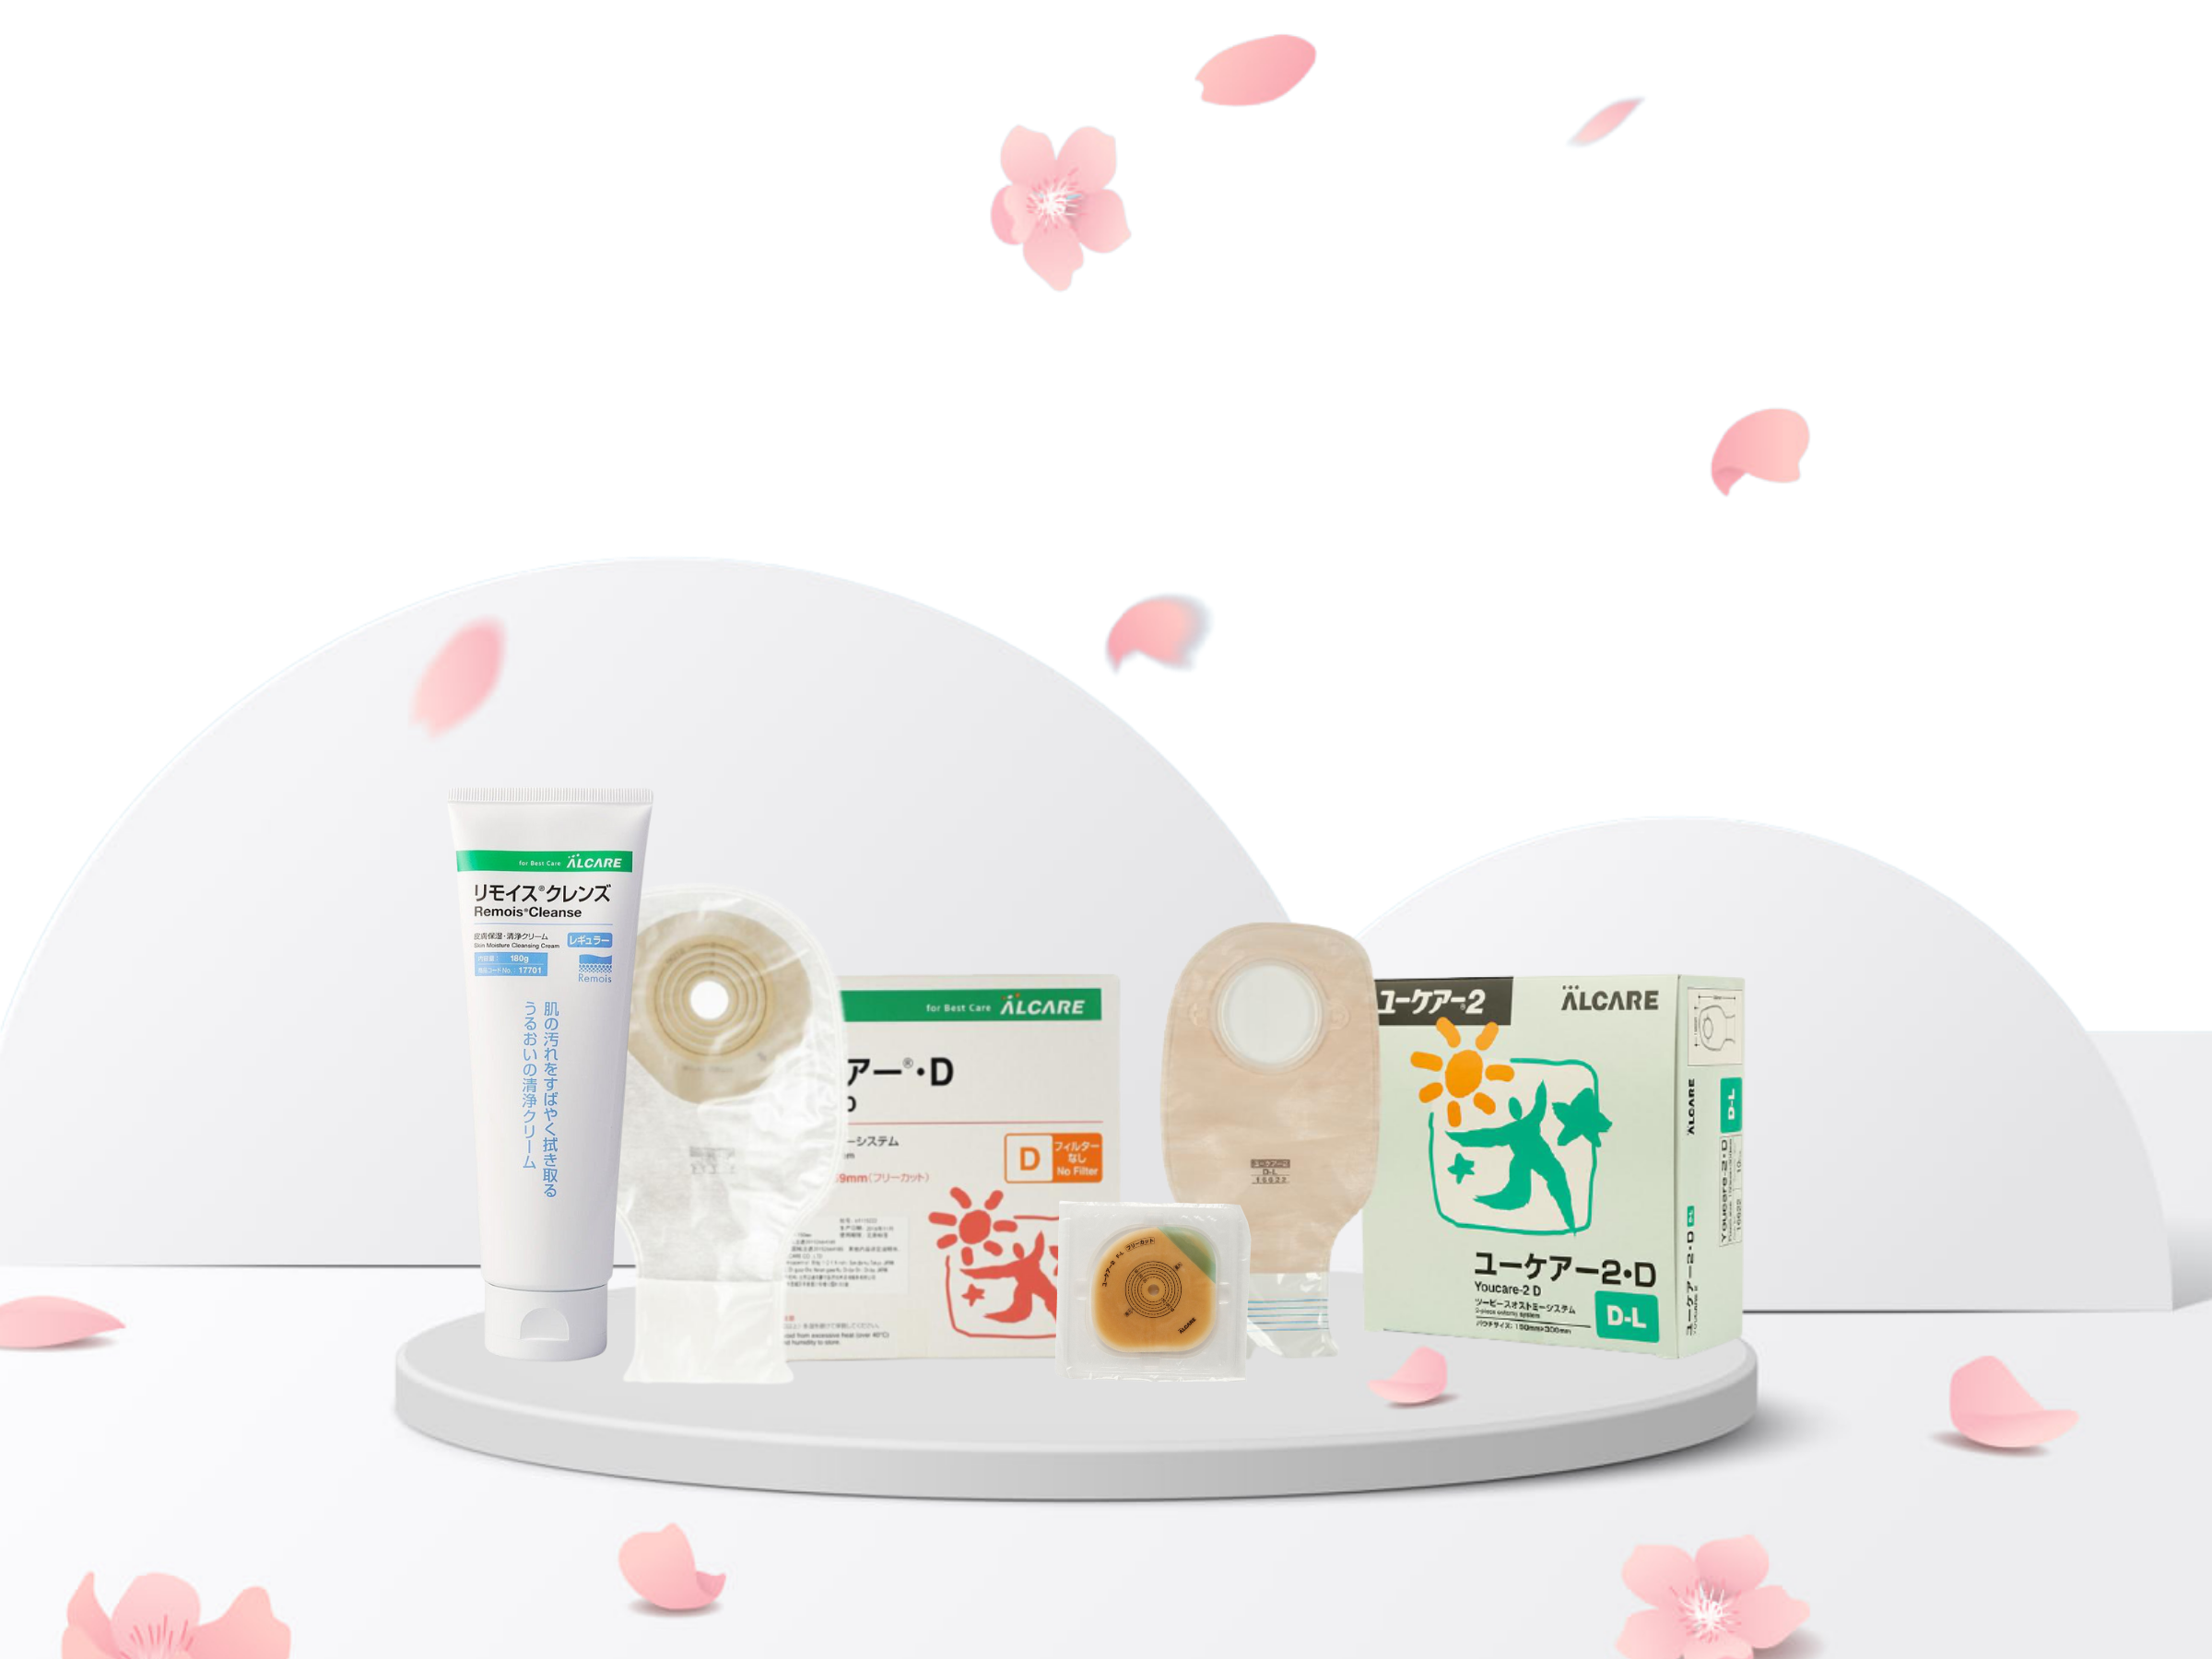 ALCARE free stoma starter kit displayed on a white table, with sakura flower petals falling on the products. Product from left: Remois Cleanse cleansing cream, Youcare D stoma bag, Youcare 2F faceplate, Youcare 2D stoma bag.